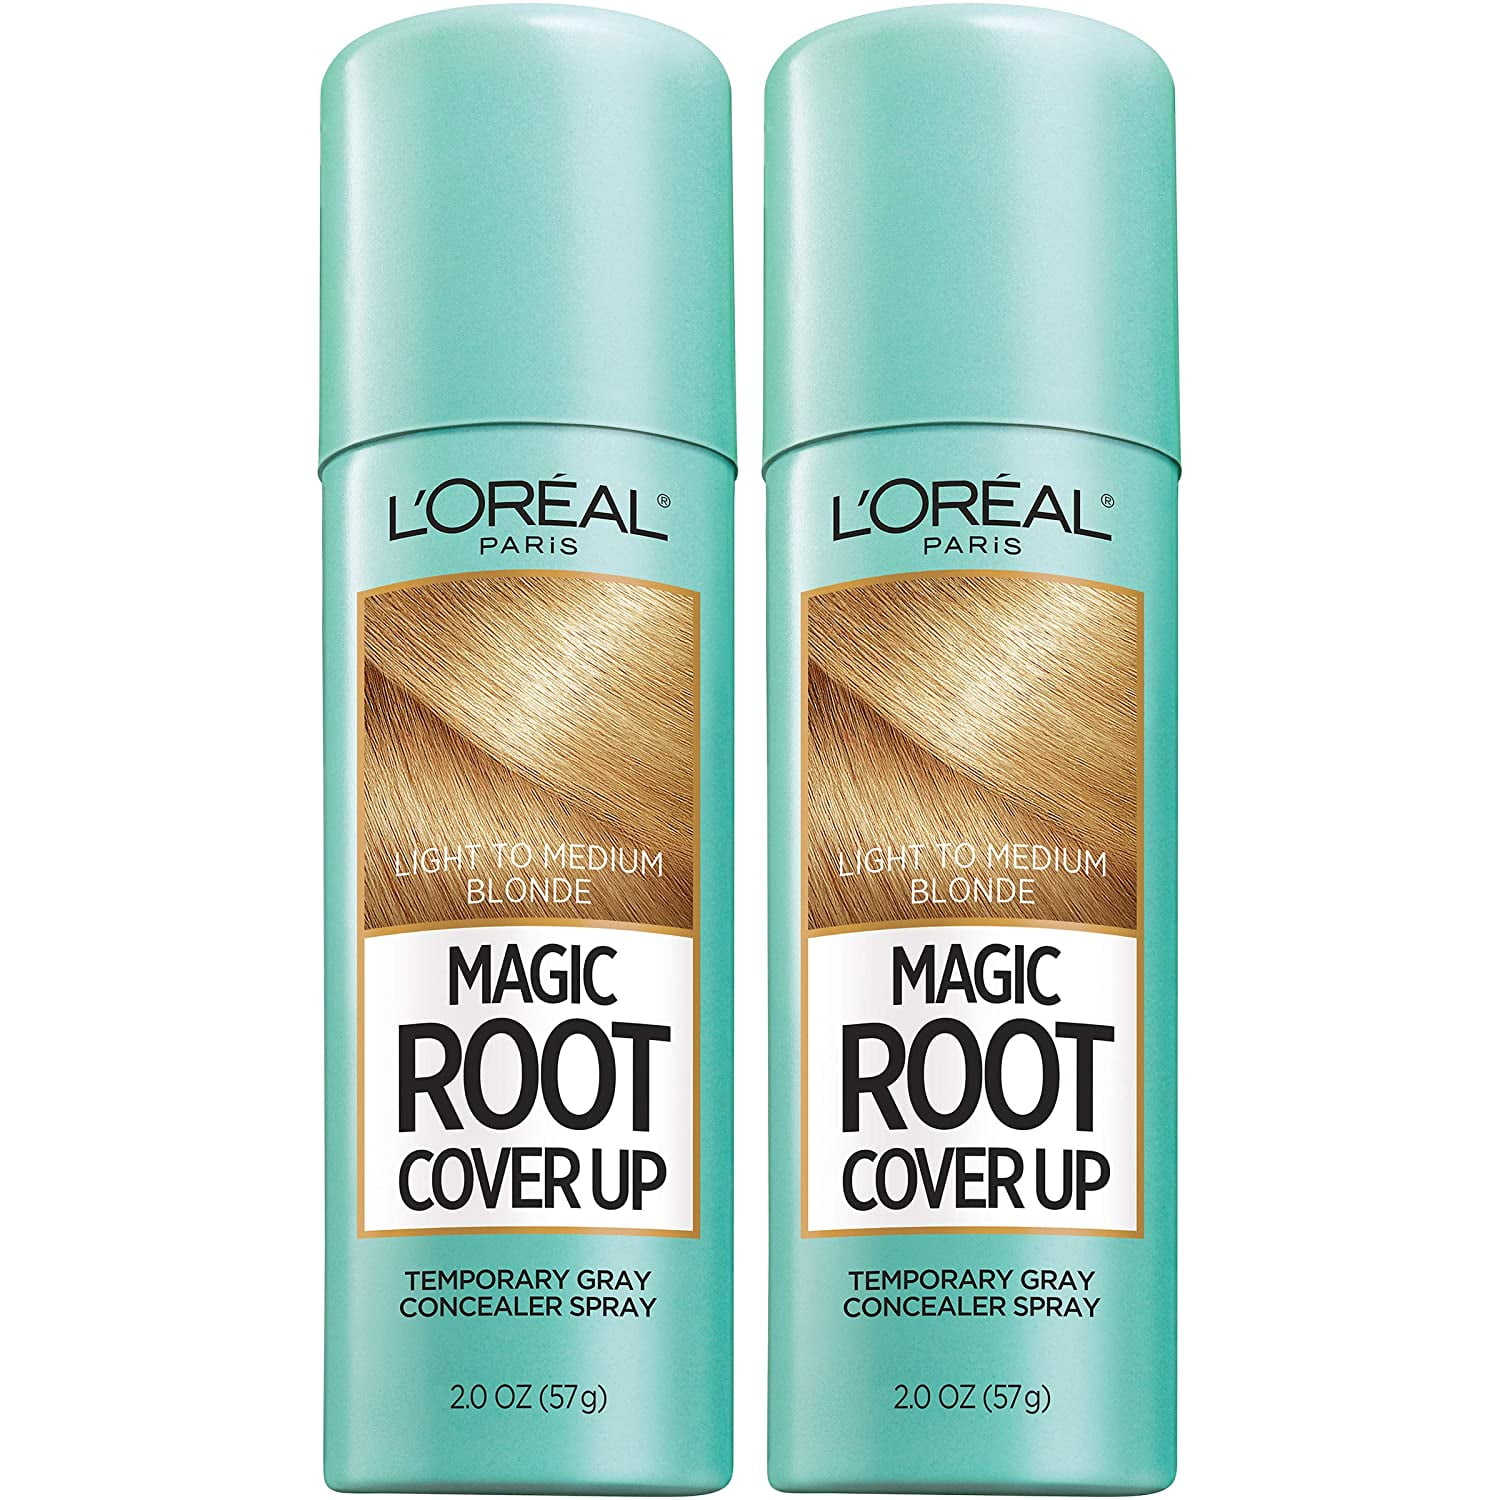 L'Oreal Paris Hair Color Magic Root Cover Up Temporary Colored Concealer  Spray for Gray Roots, Lightweight formula, Ammonia and Peroxide Free, Light  to Medium Blonde, 2 count 